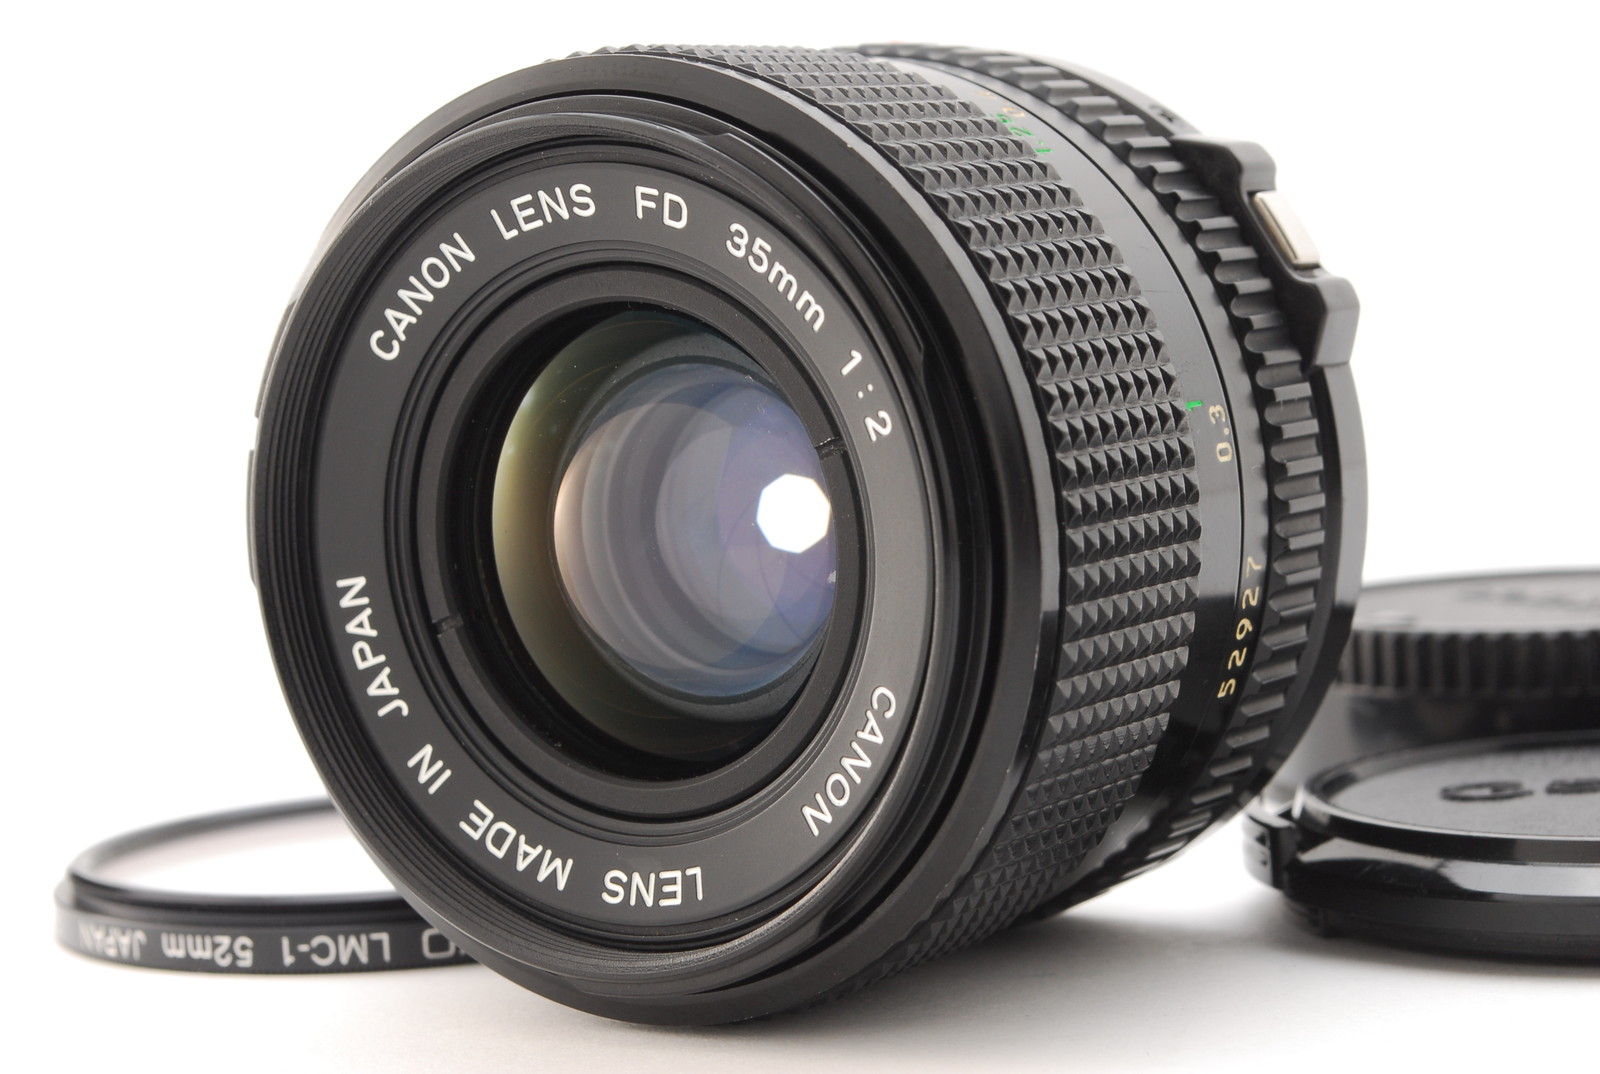 PROMOTION.EXC+++++ Canon LENS NEW FD 35mm f/2, Front Cap, Rear Cap, Lens Filter from Japan